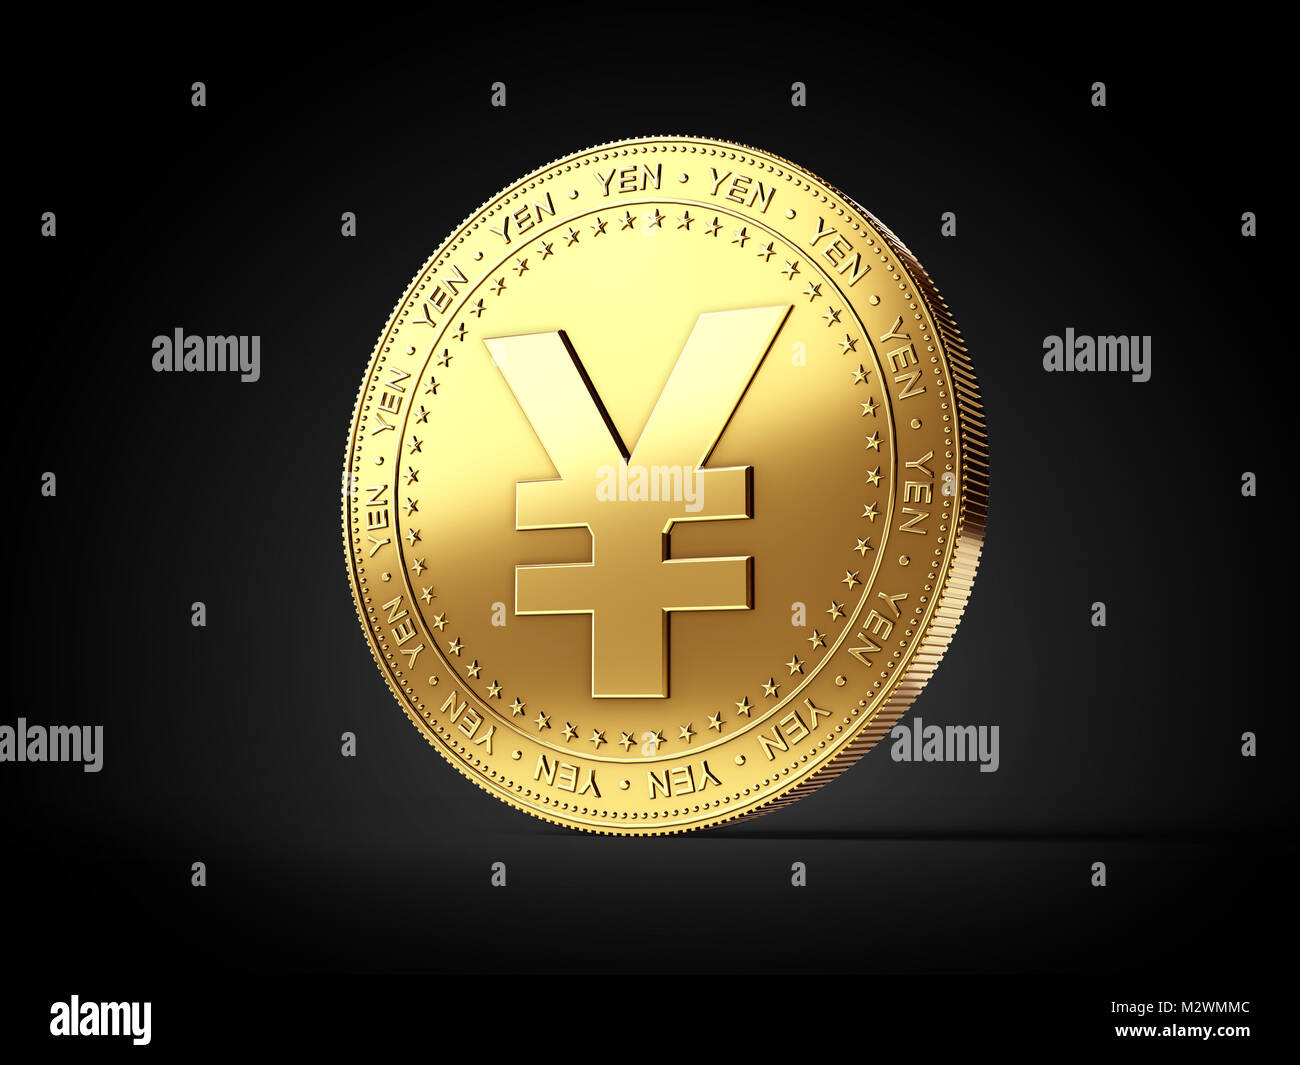 Yen (JPY) sign on golden coin isolated on black background. Realistic 3D rendering Stock Photo